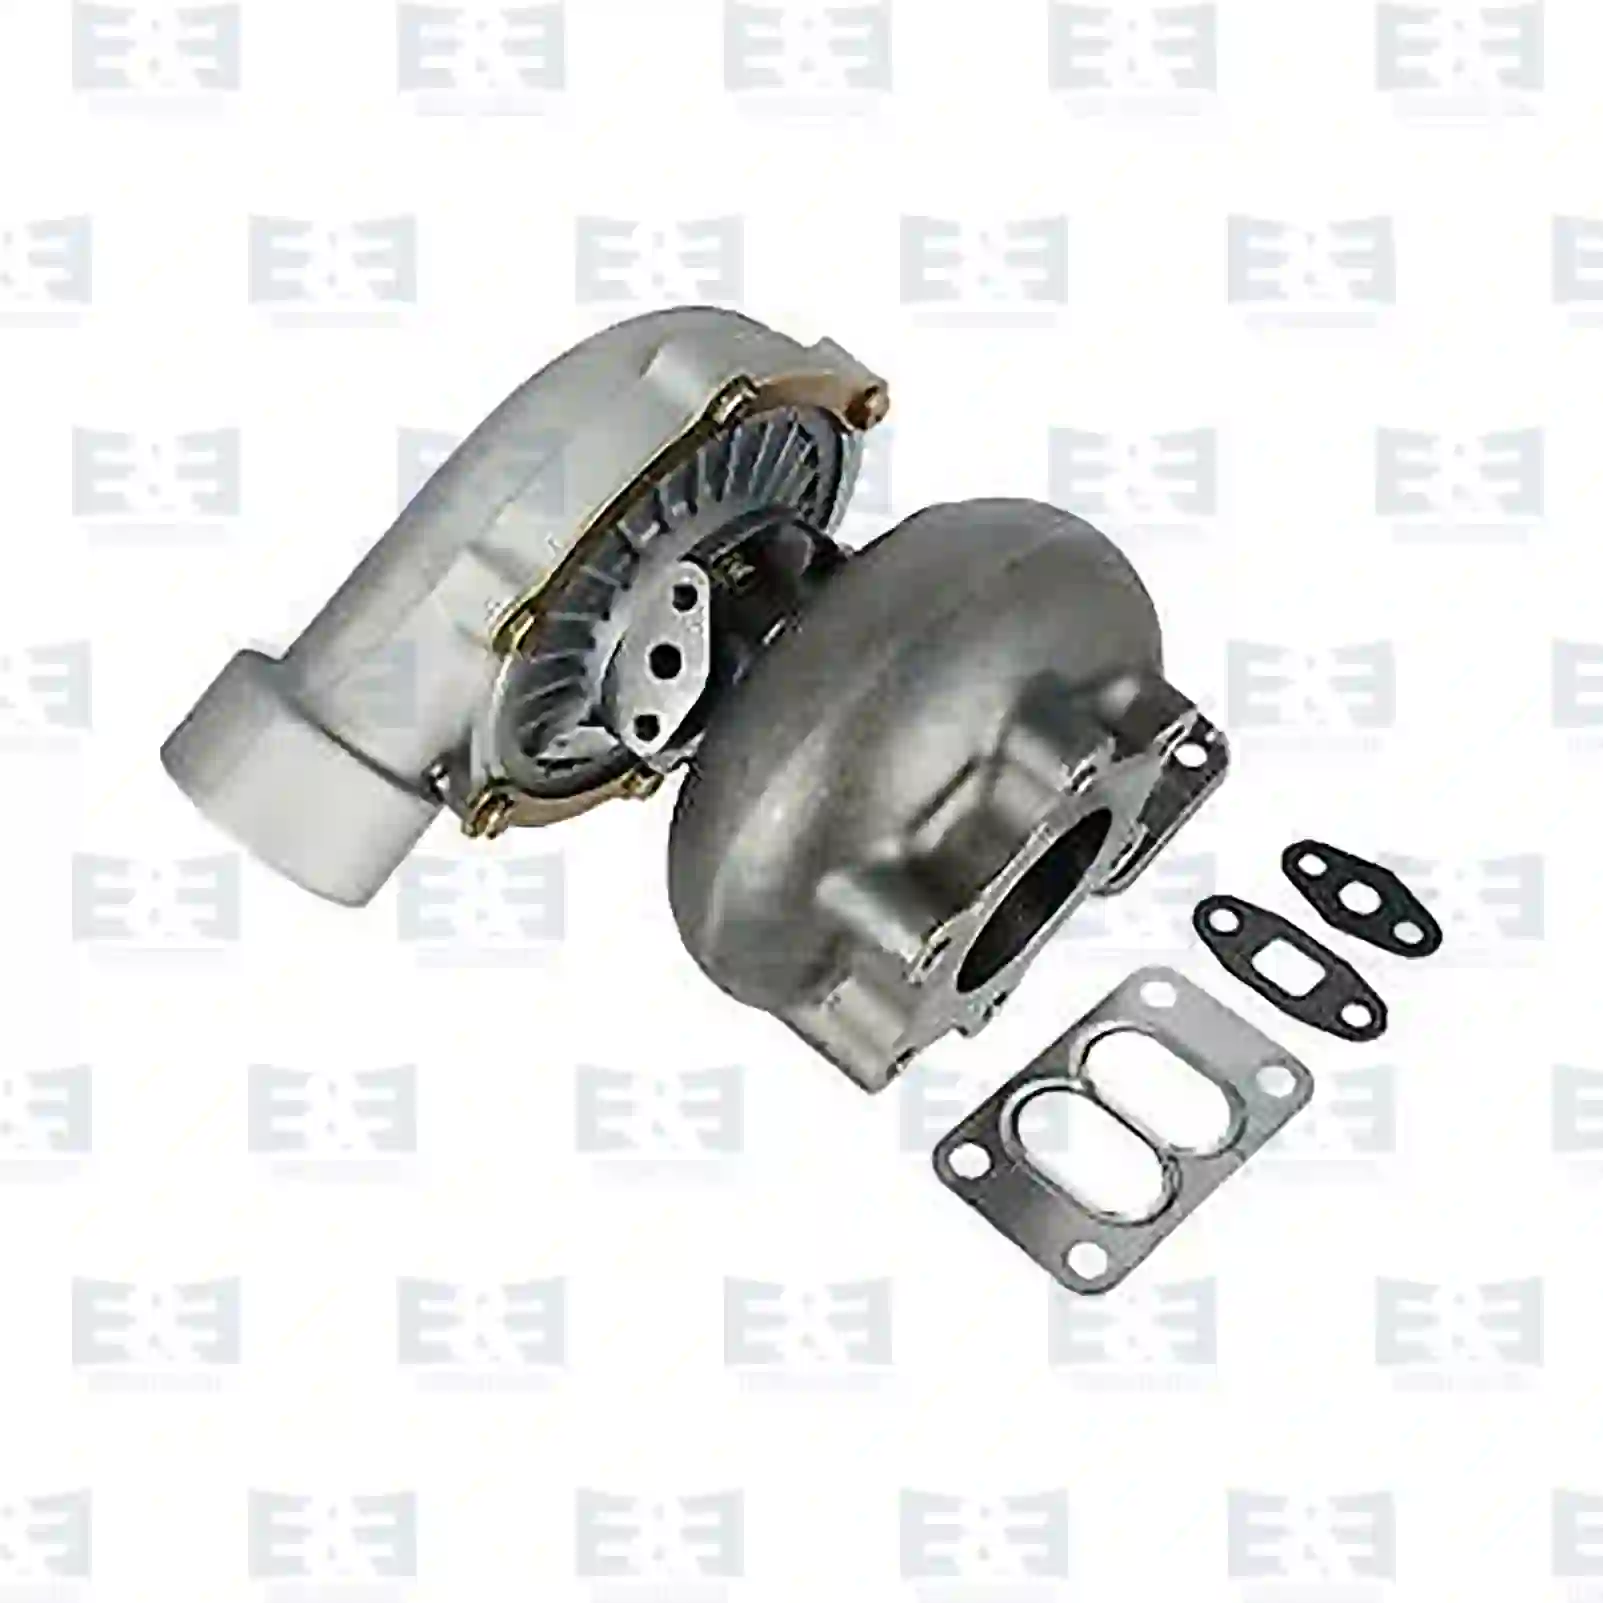 Turbocharger, with gasket kit, 2E2200754, N1011002912, N1011003536, 0030960099, 0030960199, 0030960899, 0030960999, 0030962399, 0030962499, 0030966899, 0030966999, 0030967699, 0030967899, 0030967999, 0030968999, 0030969099, 0040960799, 0040960899, 0040960999, 004096099980, 0040961099, 0040961899, 0040961999, 0040962099, 0040962199, 0040962899, 0040962999, 0040964099, 0040964199, 0040964299, 0040964399, 0040965299, 0040965599, 0040965699, 0040965799, 0040966099, 004096609980, 0040966199, 0040966299, 0040966399, 0040967699, 0050962399, 0050962499, 0050962599, 005096259980, 0050962699, 0050969399, 005096939980, 0060963199, 0060963299, 0060963399, 0060963499, 4620960299, 4620960399, 5096939980 ||  2E2200754 E&E Truck Spare Parts | Truck Spare Parts, Auotomotive Spare Parts Turbocharger, with gasket kit, 2E2200754, N1011002912, N1011003536, 0030960099, 0030960199, 0030960899, 0030960999, 0030962399, 0030962499, 0030966899, 0030966999, 0030967699, 0030967899, 0030967999, 0030968999, 0030969099, 0040960799, 0040960899, 0040960999, 004096099980, 0040961099, 0040961899, 0040961999, 0040962099, 0040962199, 0040962899, 0040962999, 0040964099, 0040964199, 0040964299, 0040964399, 0040965299, 0040965599, 0040965699, 0040965799, 0040966099, 004096609980, 0040966199, 0040966299, 0040966399, 0040967699, 0050962399, 0050962499, 0050962599, 005096259980, 0050962699, 0050969399, 005096939980, 0060963199, 0060963299, 0060963399, 0060963499, 4620960299, 4620960399, 5096939980 ||  2E2200754 E&E Truck Spare Parts | Truck Spare Parts, Auotomotive Spare Parts